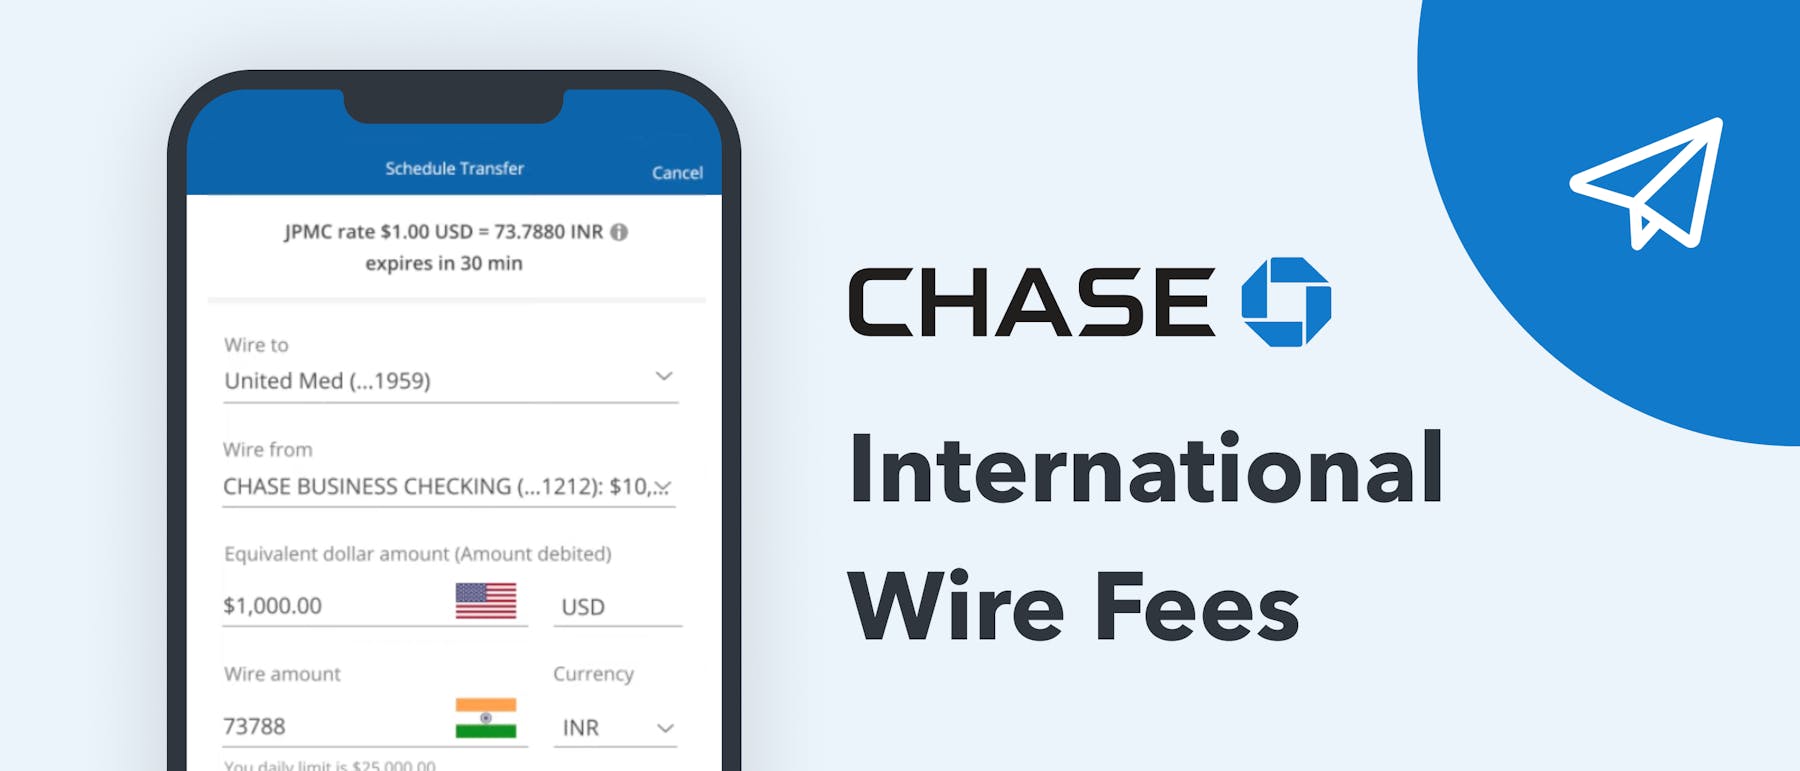 Chase International Wire Fees investigated by Monito